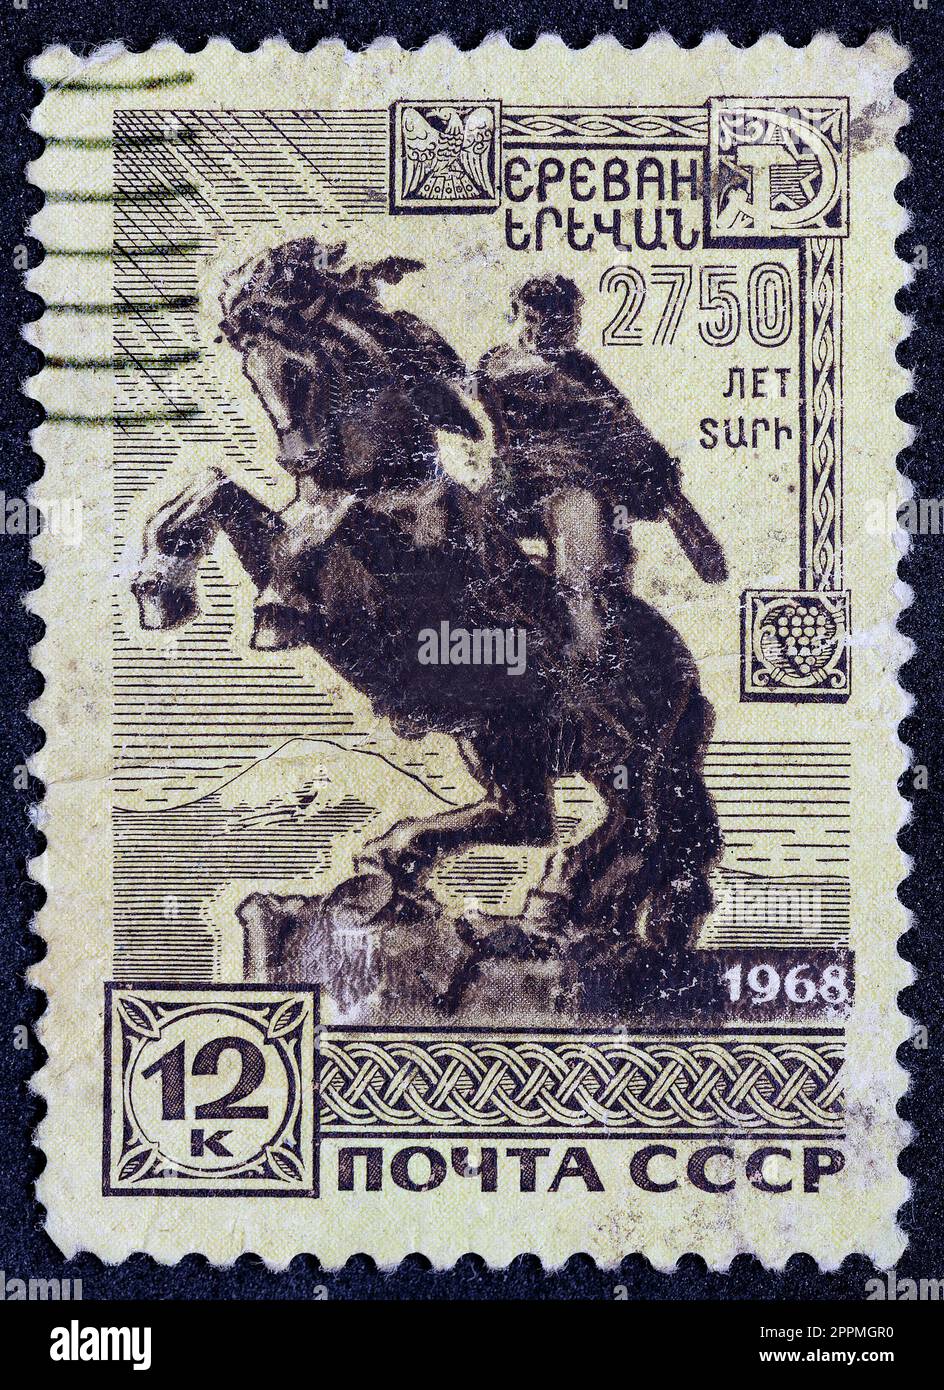 USSR - CIRCA 1968: Postage stamp 12 kopeck printed in the Soviet Union shows man on a rearing horse capital of Armenia - David of Sassoun monument. Post stamp series devoted to 2750 years of Yerevan. Stock Photo